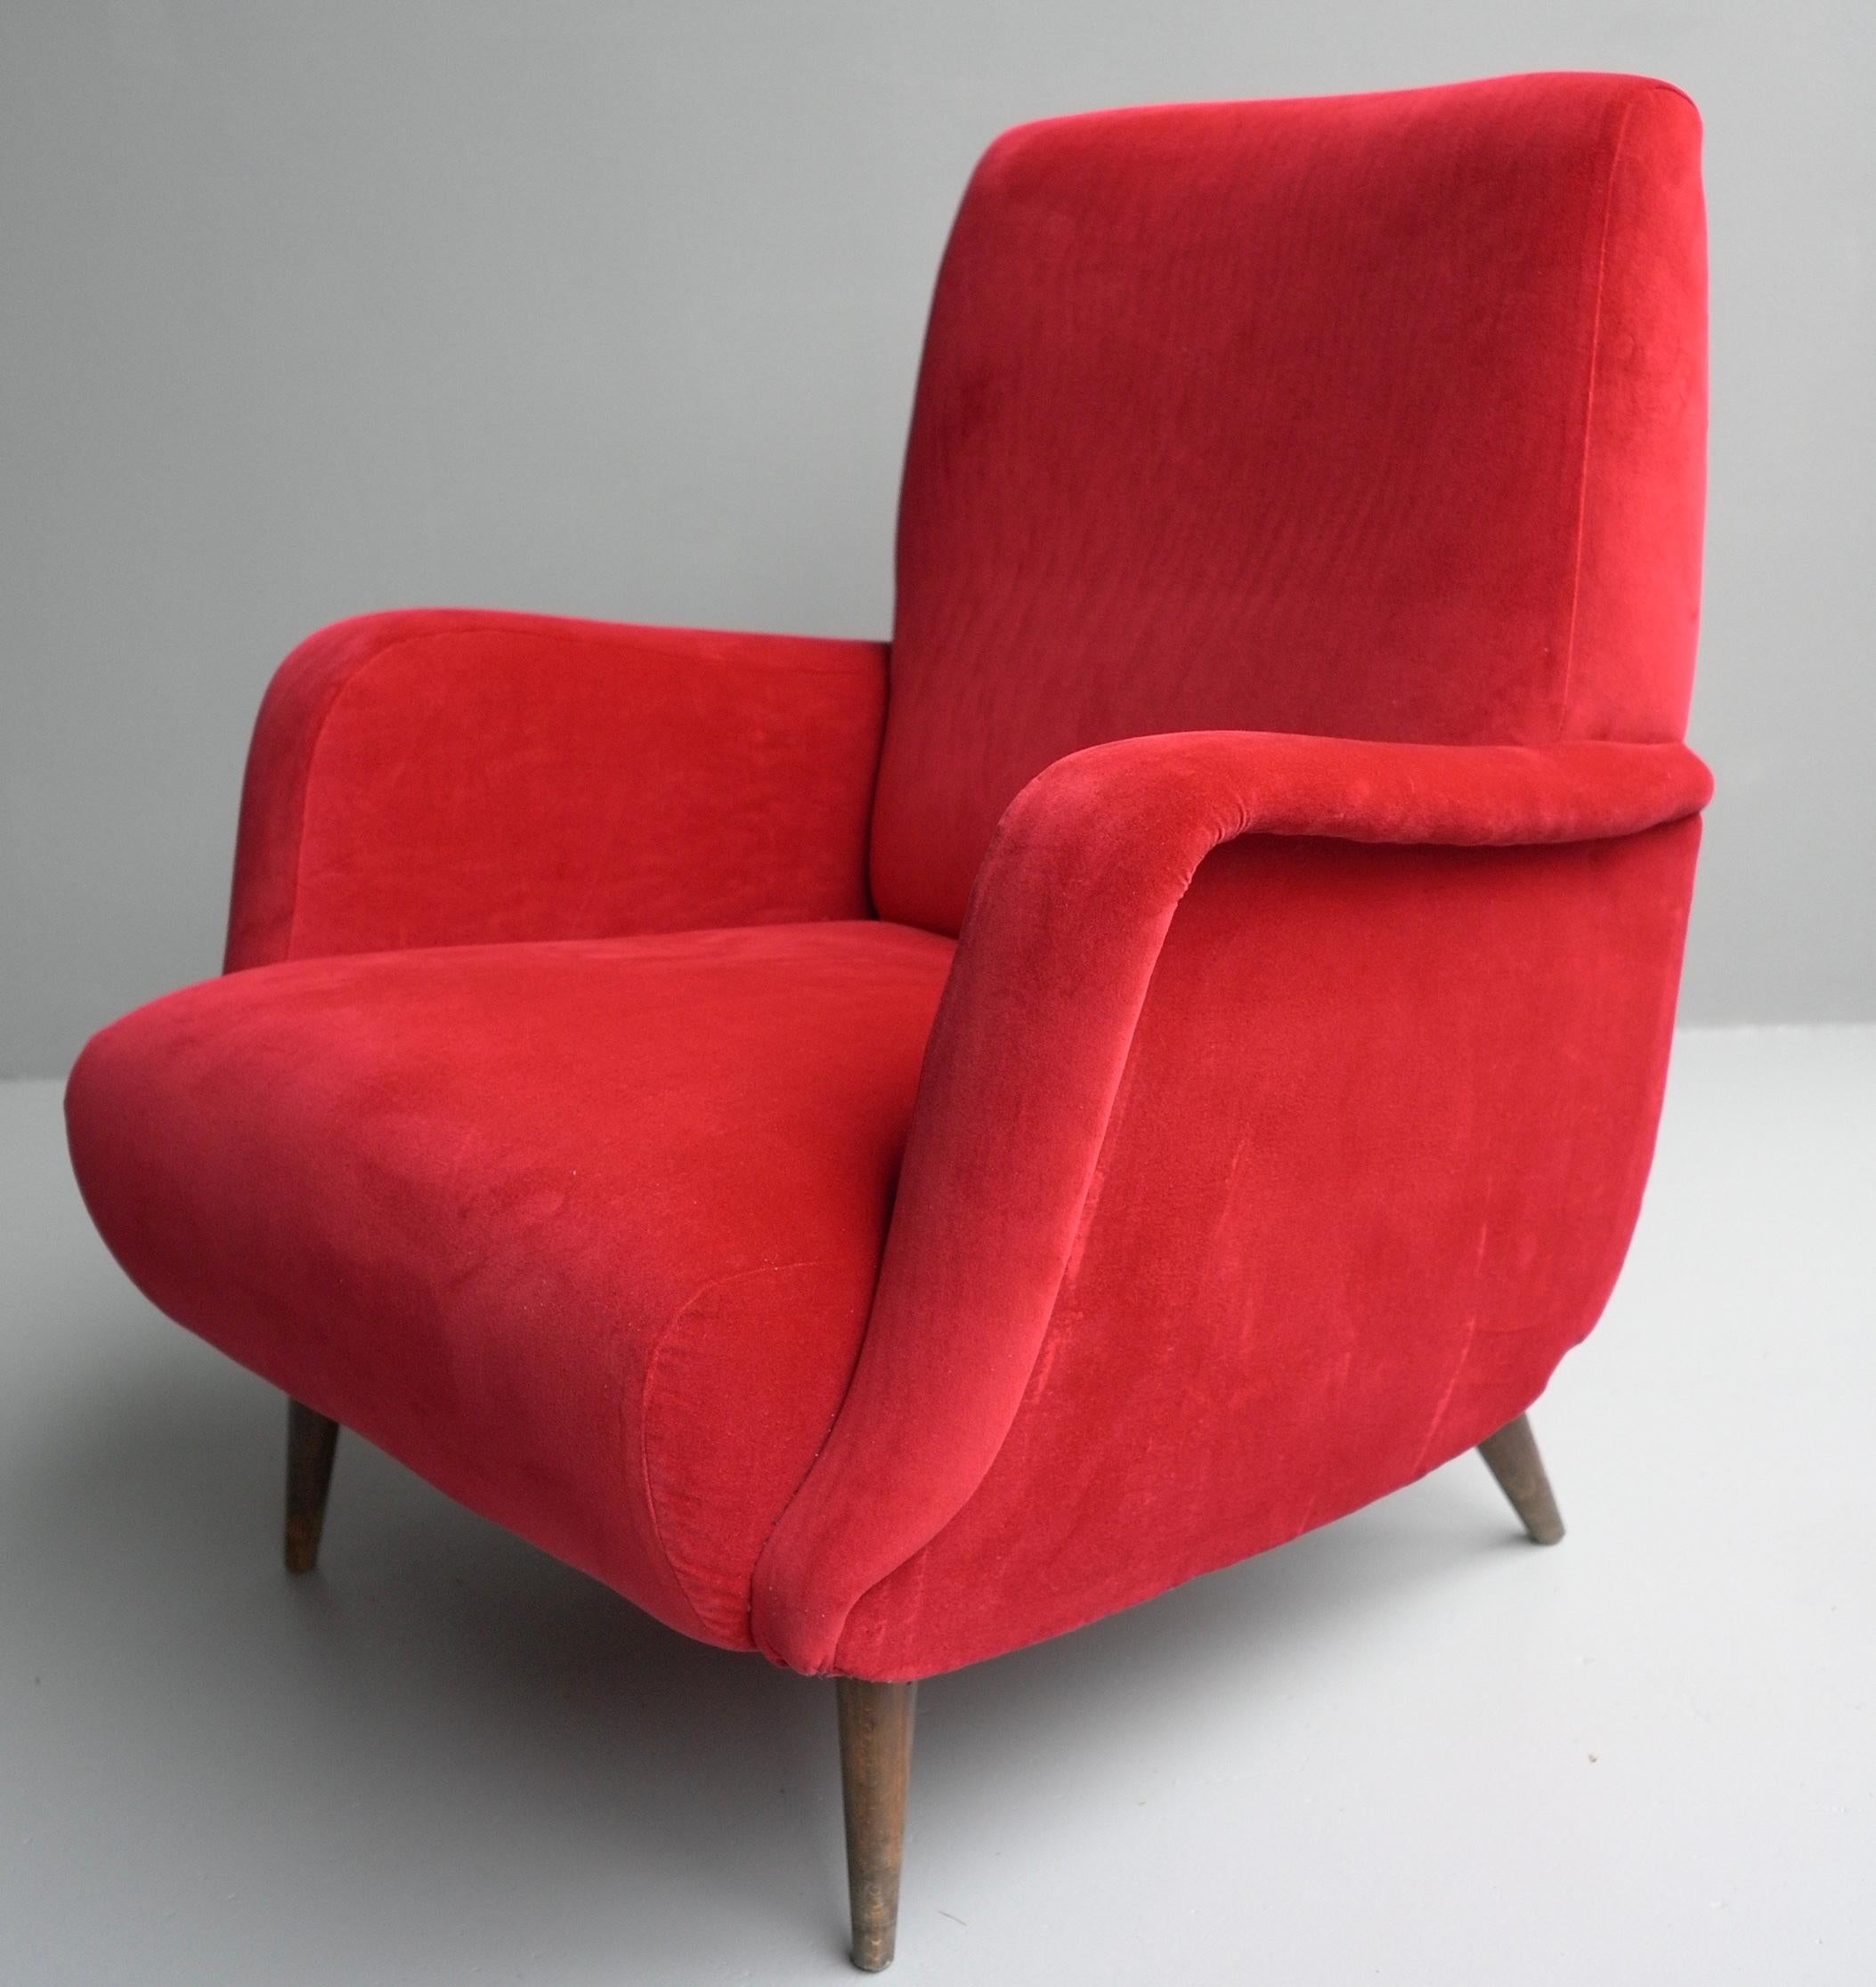 Mid-20th Century Carlo de Carli Red velvet and Walnut Armchair Model 806 by Cassina, Italy, 1955 For Sale